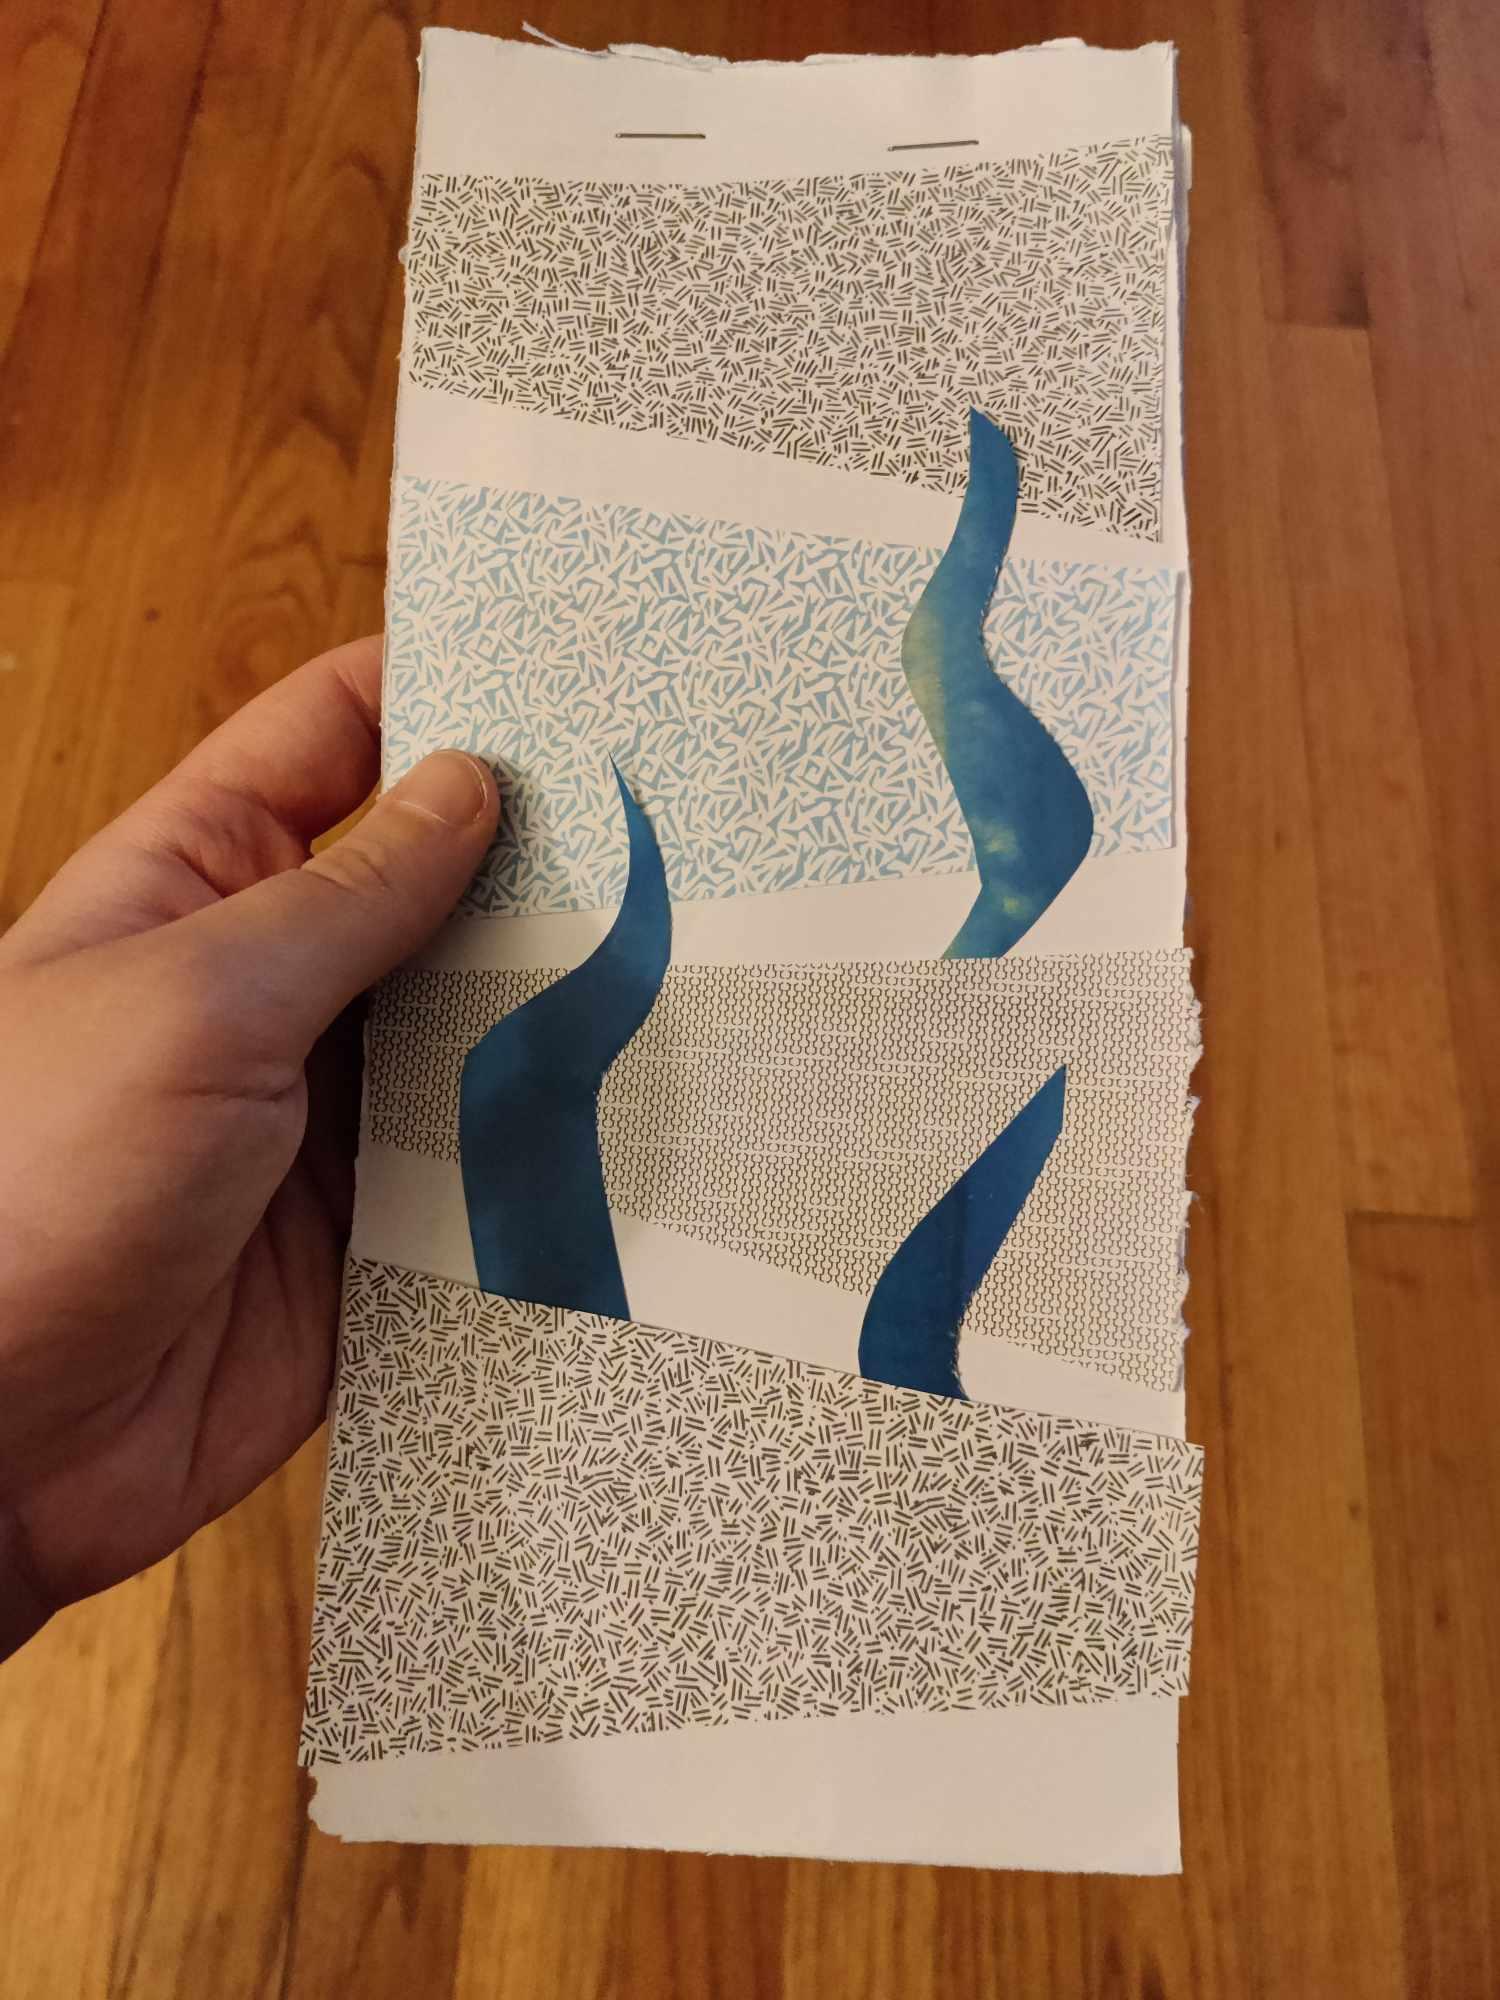 a makeshift notebook made of cut-up envelopes stapled together at the top, with an abstract collage of blue and grey patterned paper on the front